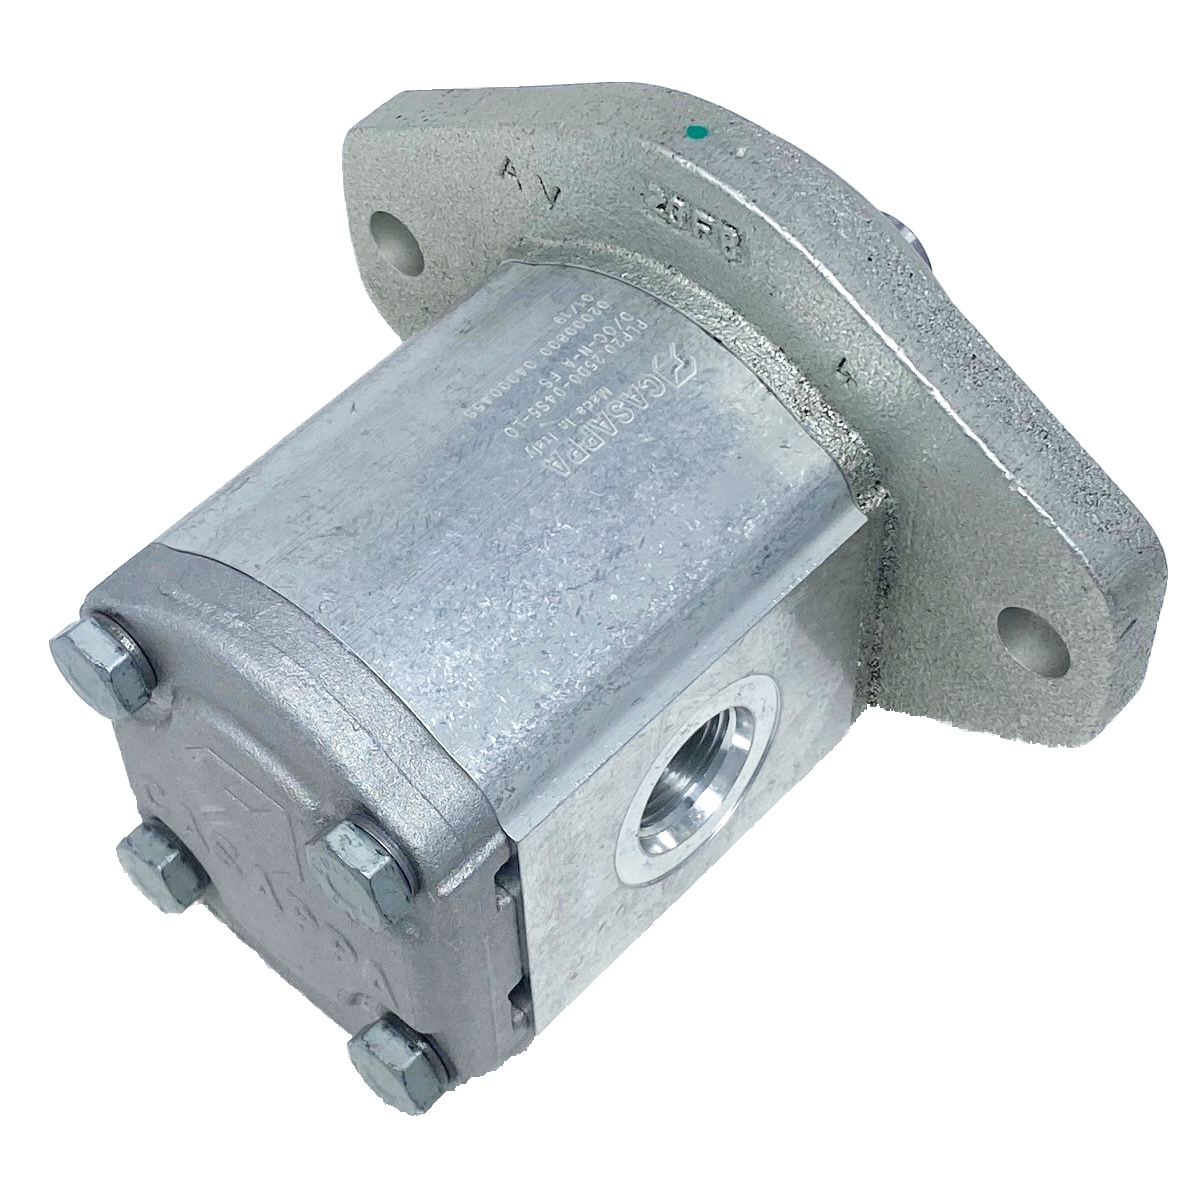 PHM20.31,5R0-32S5-LOC/OG-N-L : Casappa Polaris Gear Motor, 33.03cc, 2900psi, 2500RPM, Reversible, External Drain, 3/4" Bore x 1/4" Key Shaft, SAE B 2-Bolt Flange, 0.625 (5/8") #10 SAE In, 1.25" #20 SAE Out, Cast Iron Body Cast Iron Flange And Cover